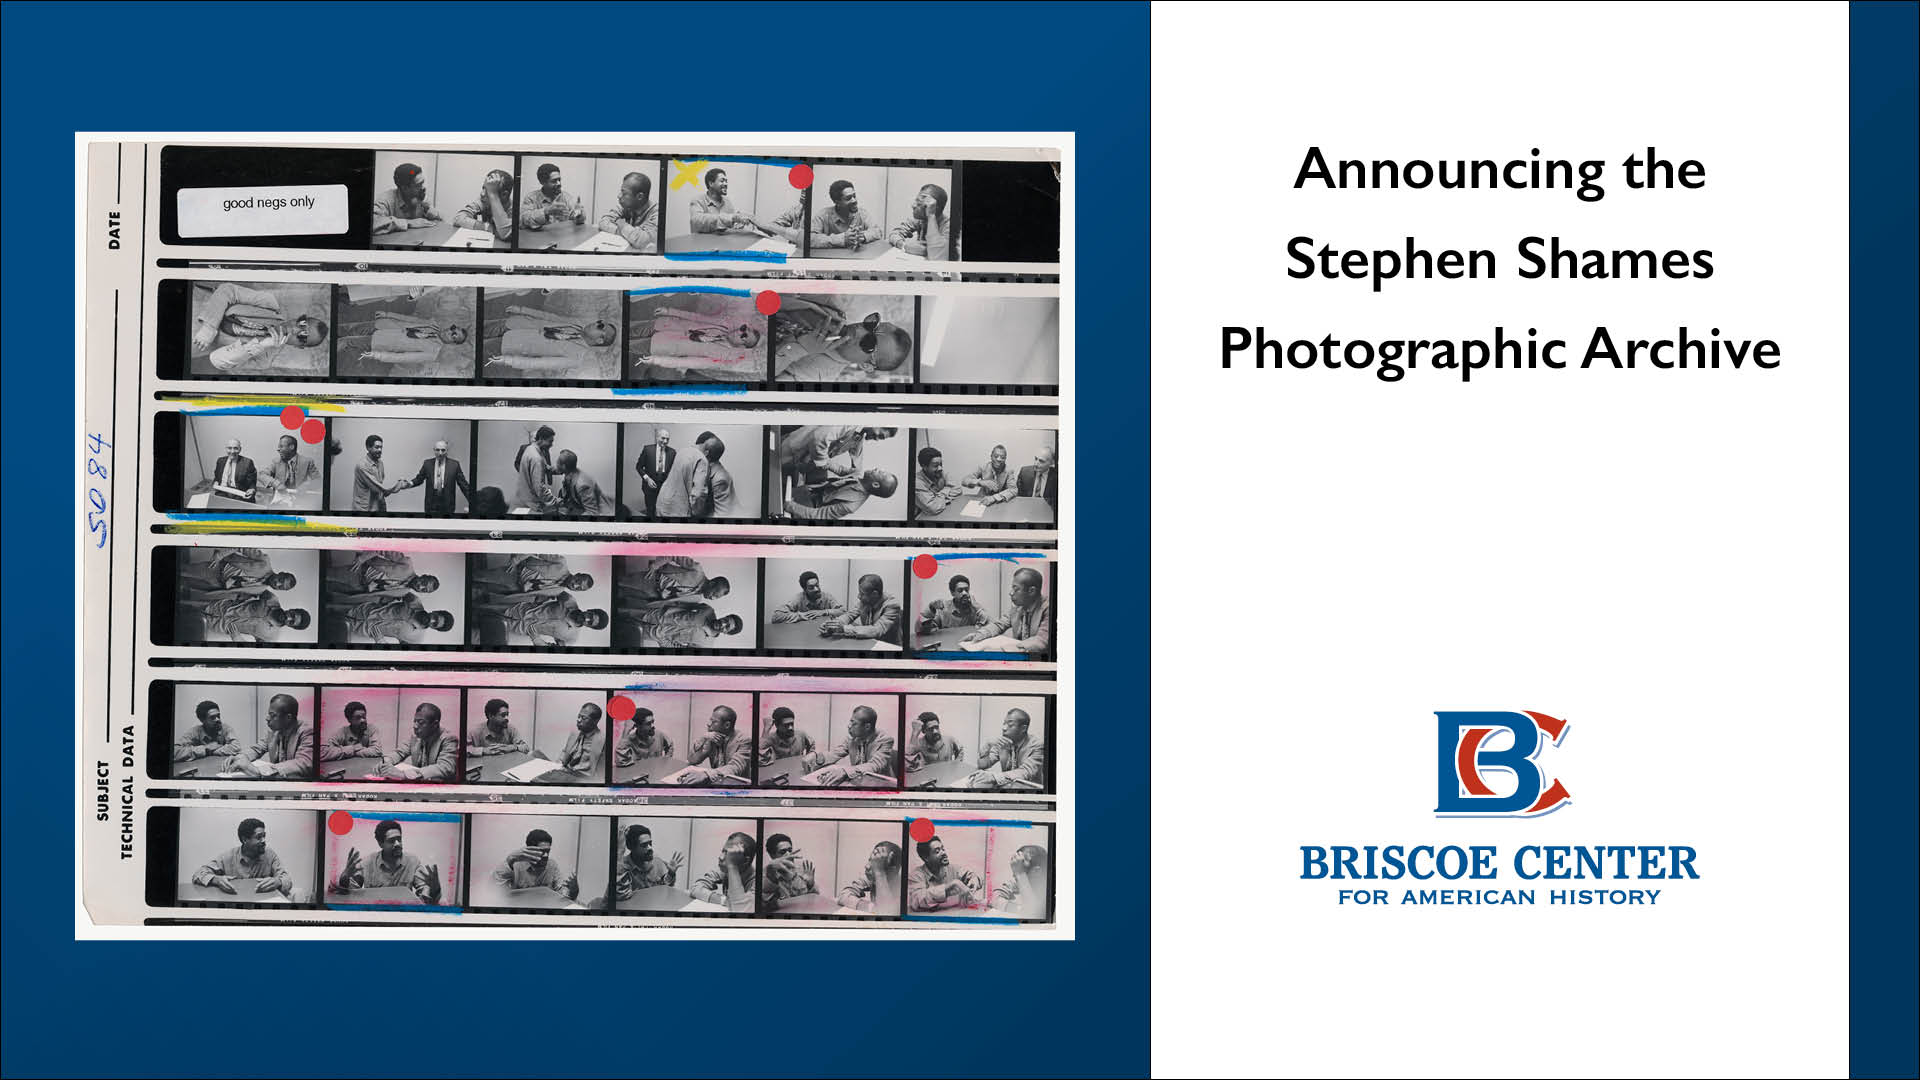 Announcing the Stephen Shames Photographic Archive